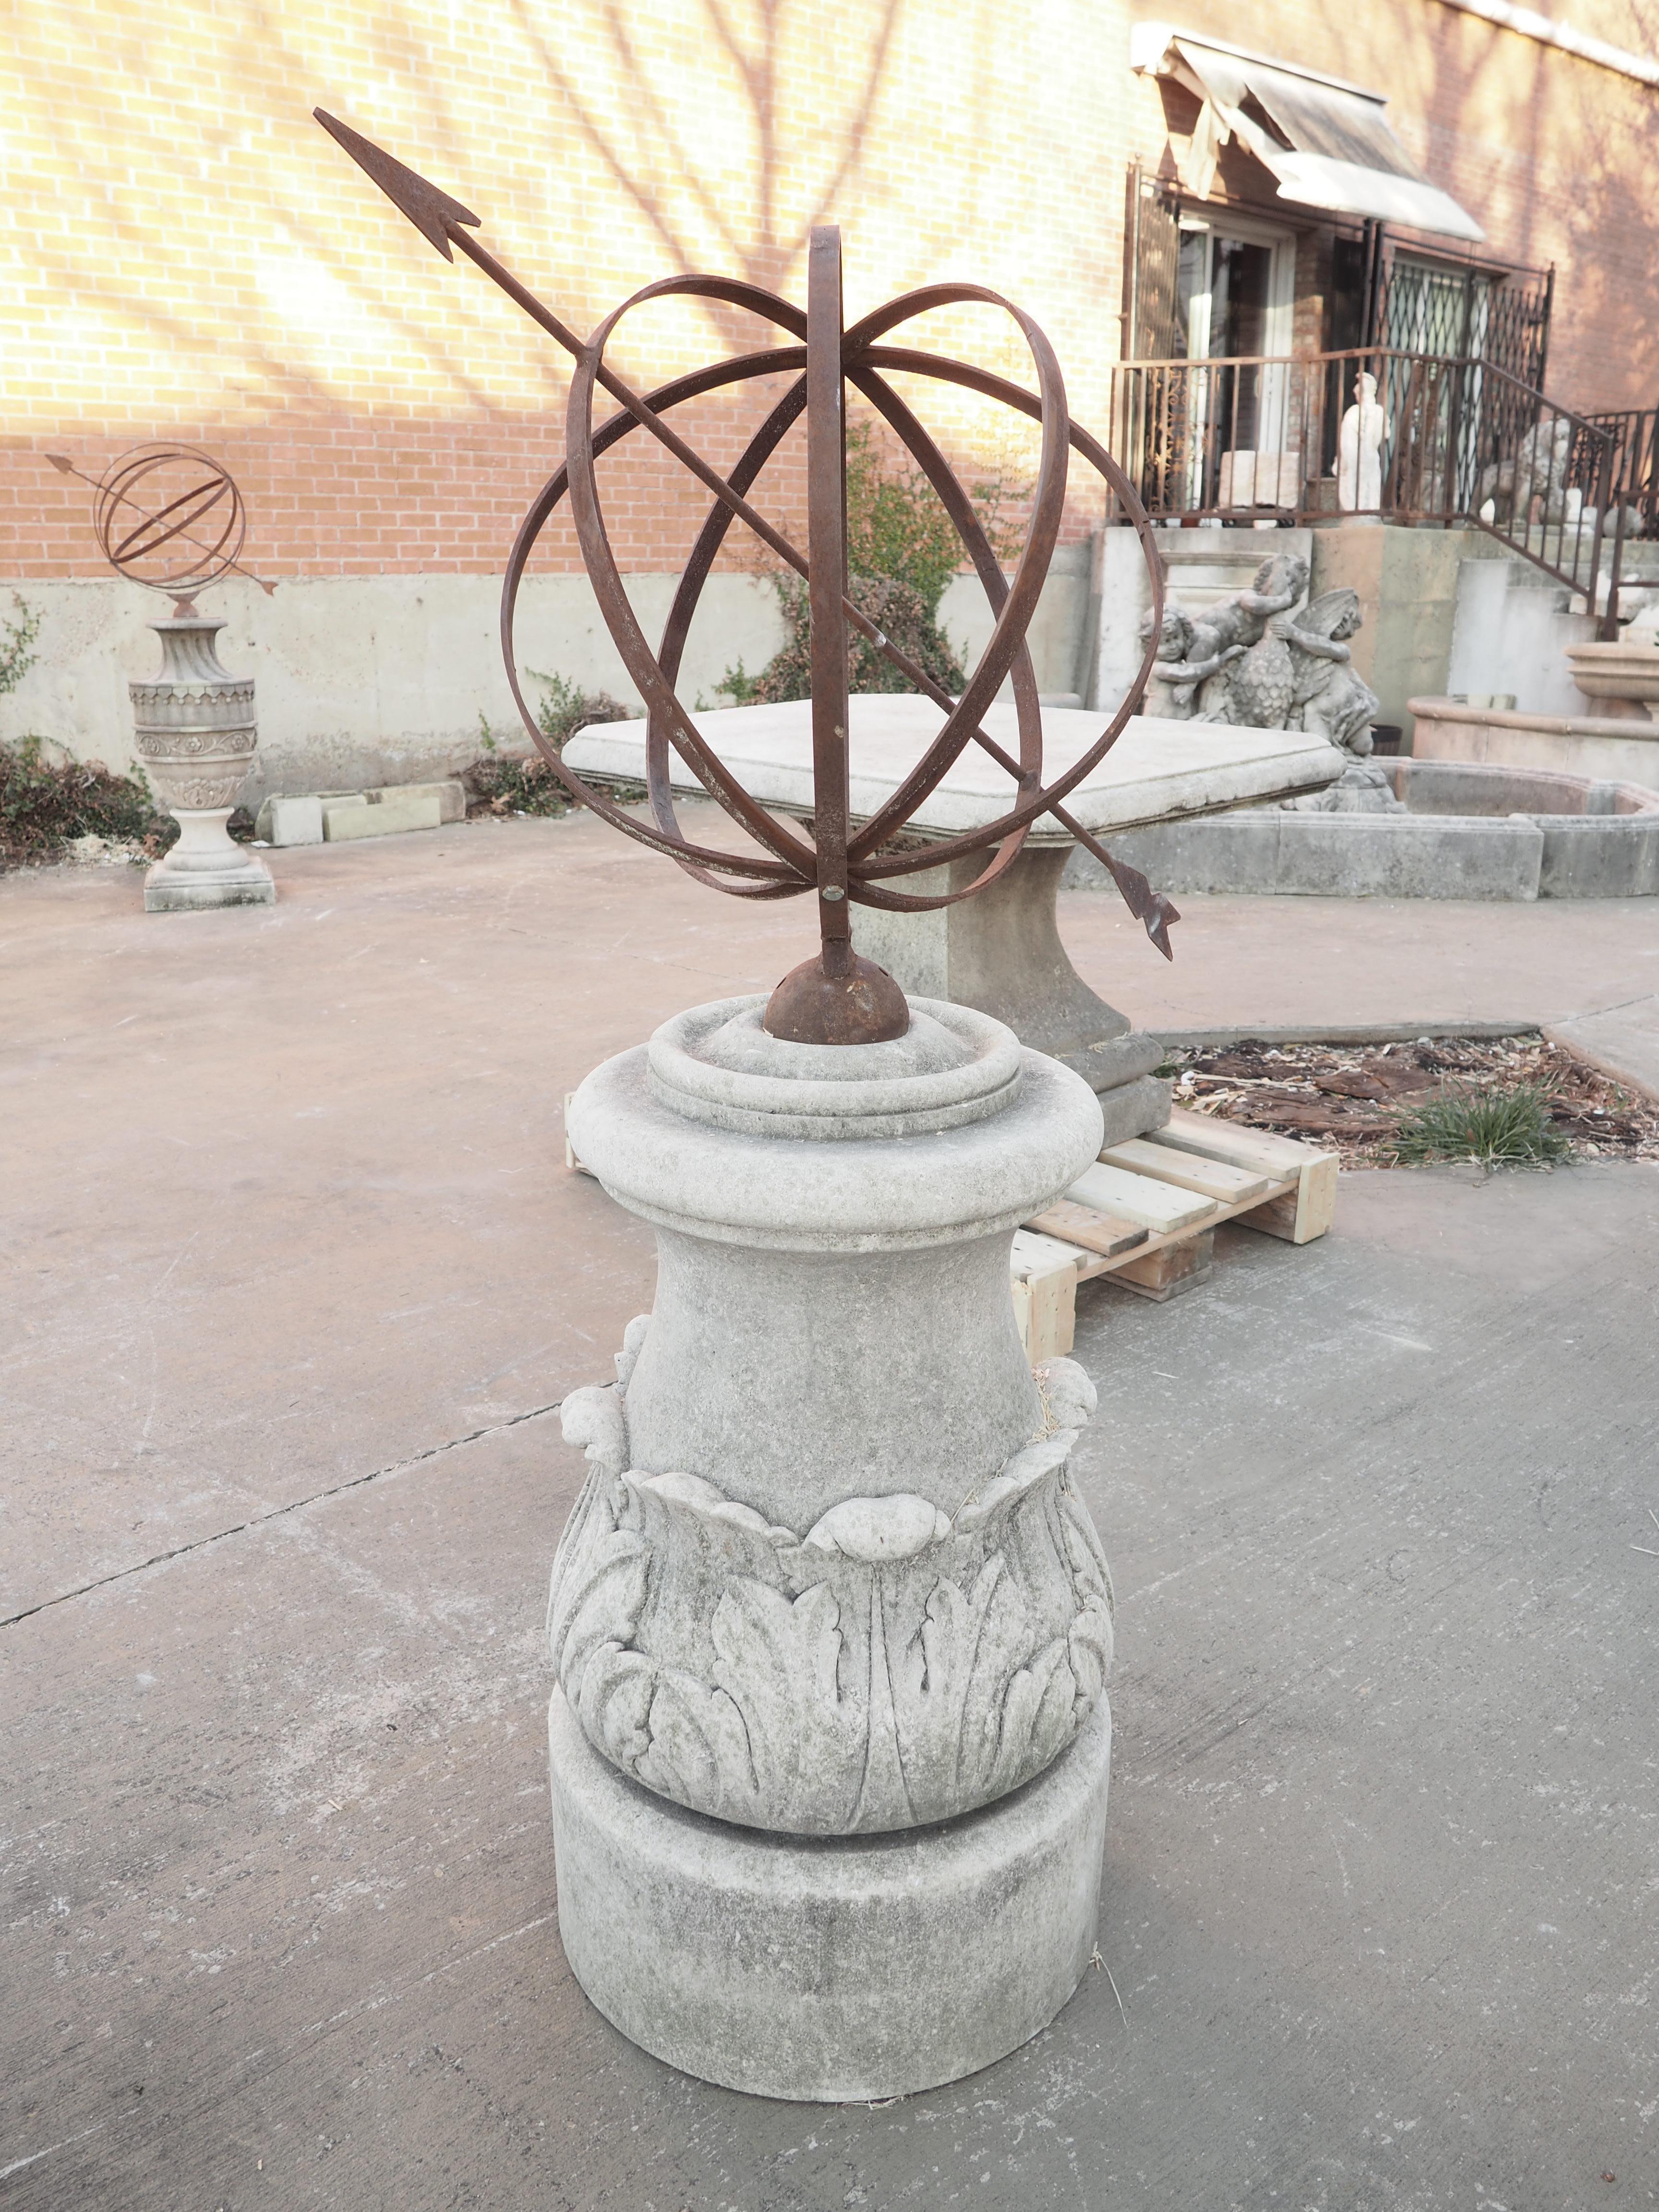 Contemporary Armillary Sundial with Carved Acanthus Leaf Decor and Wrought Iron Sphere